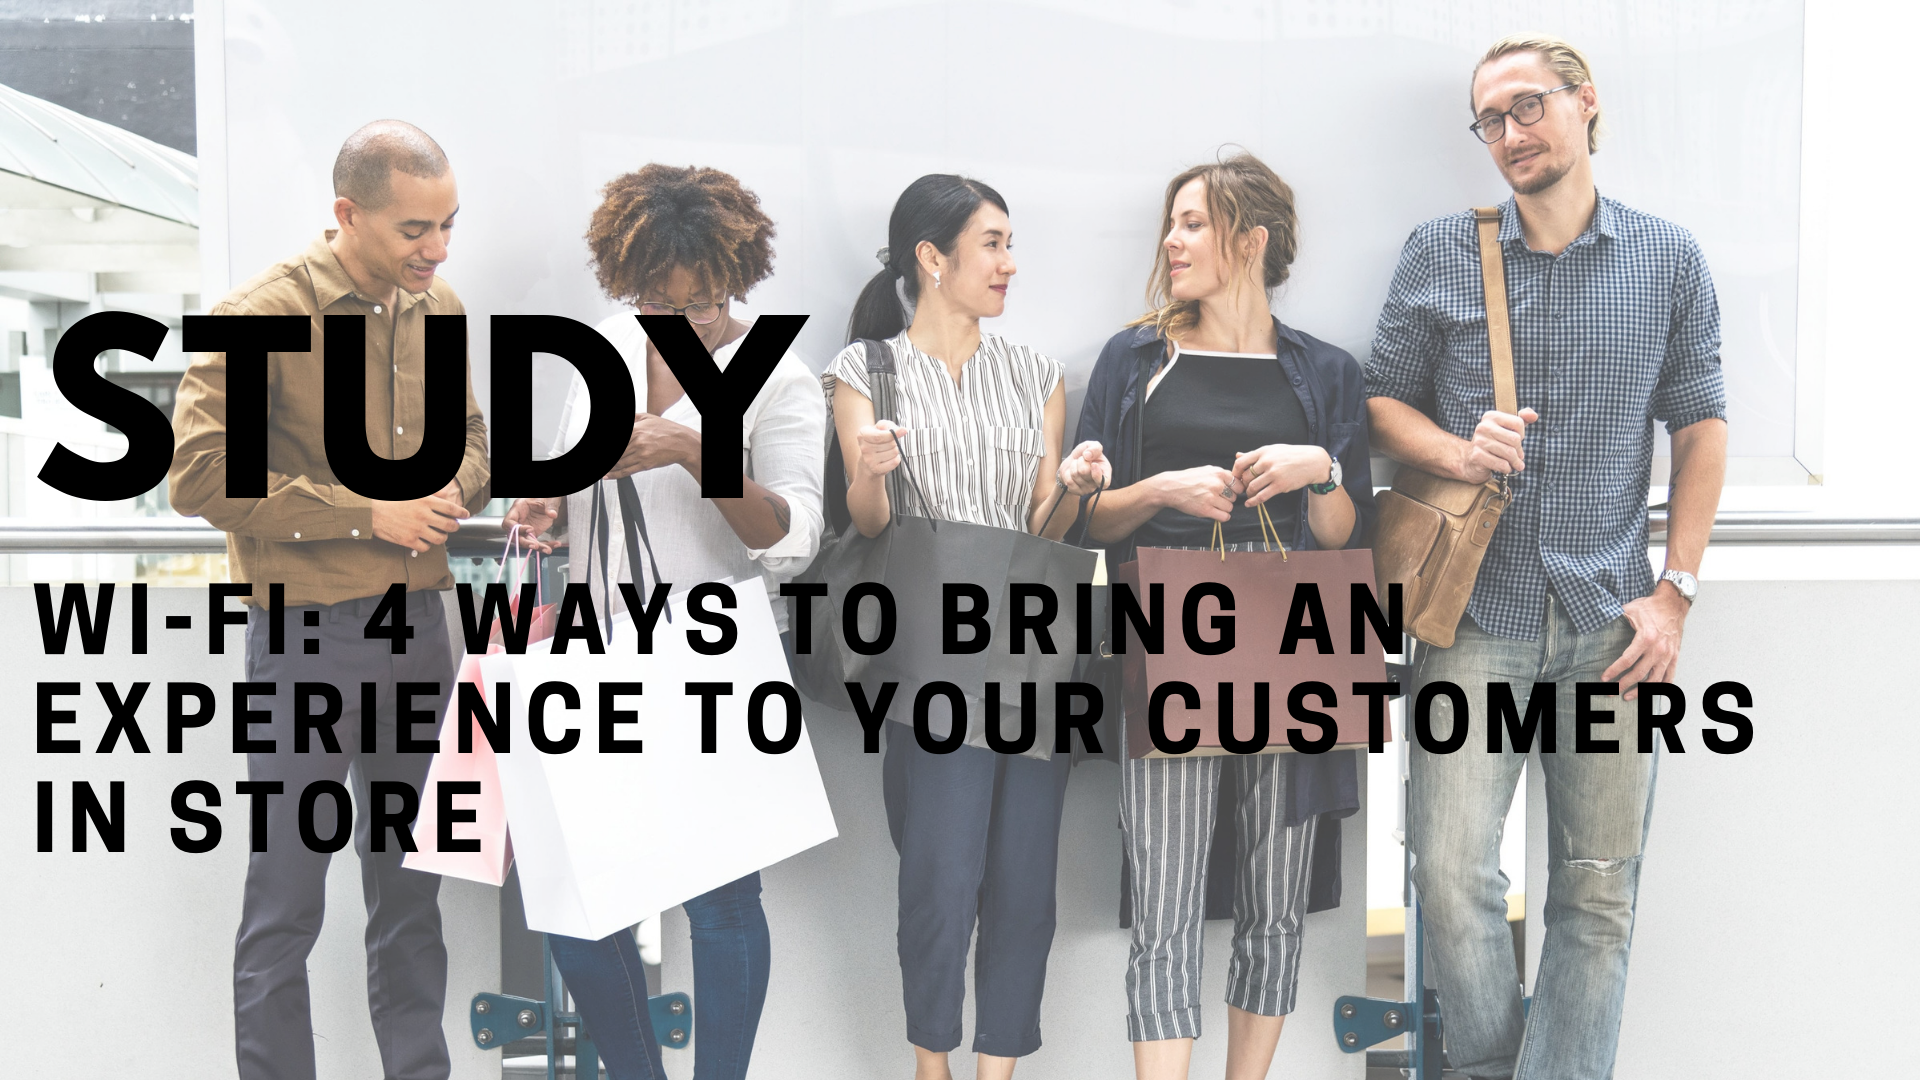 Study - 4 ways to develop the customer experience in store